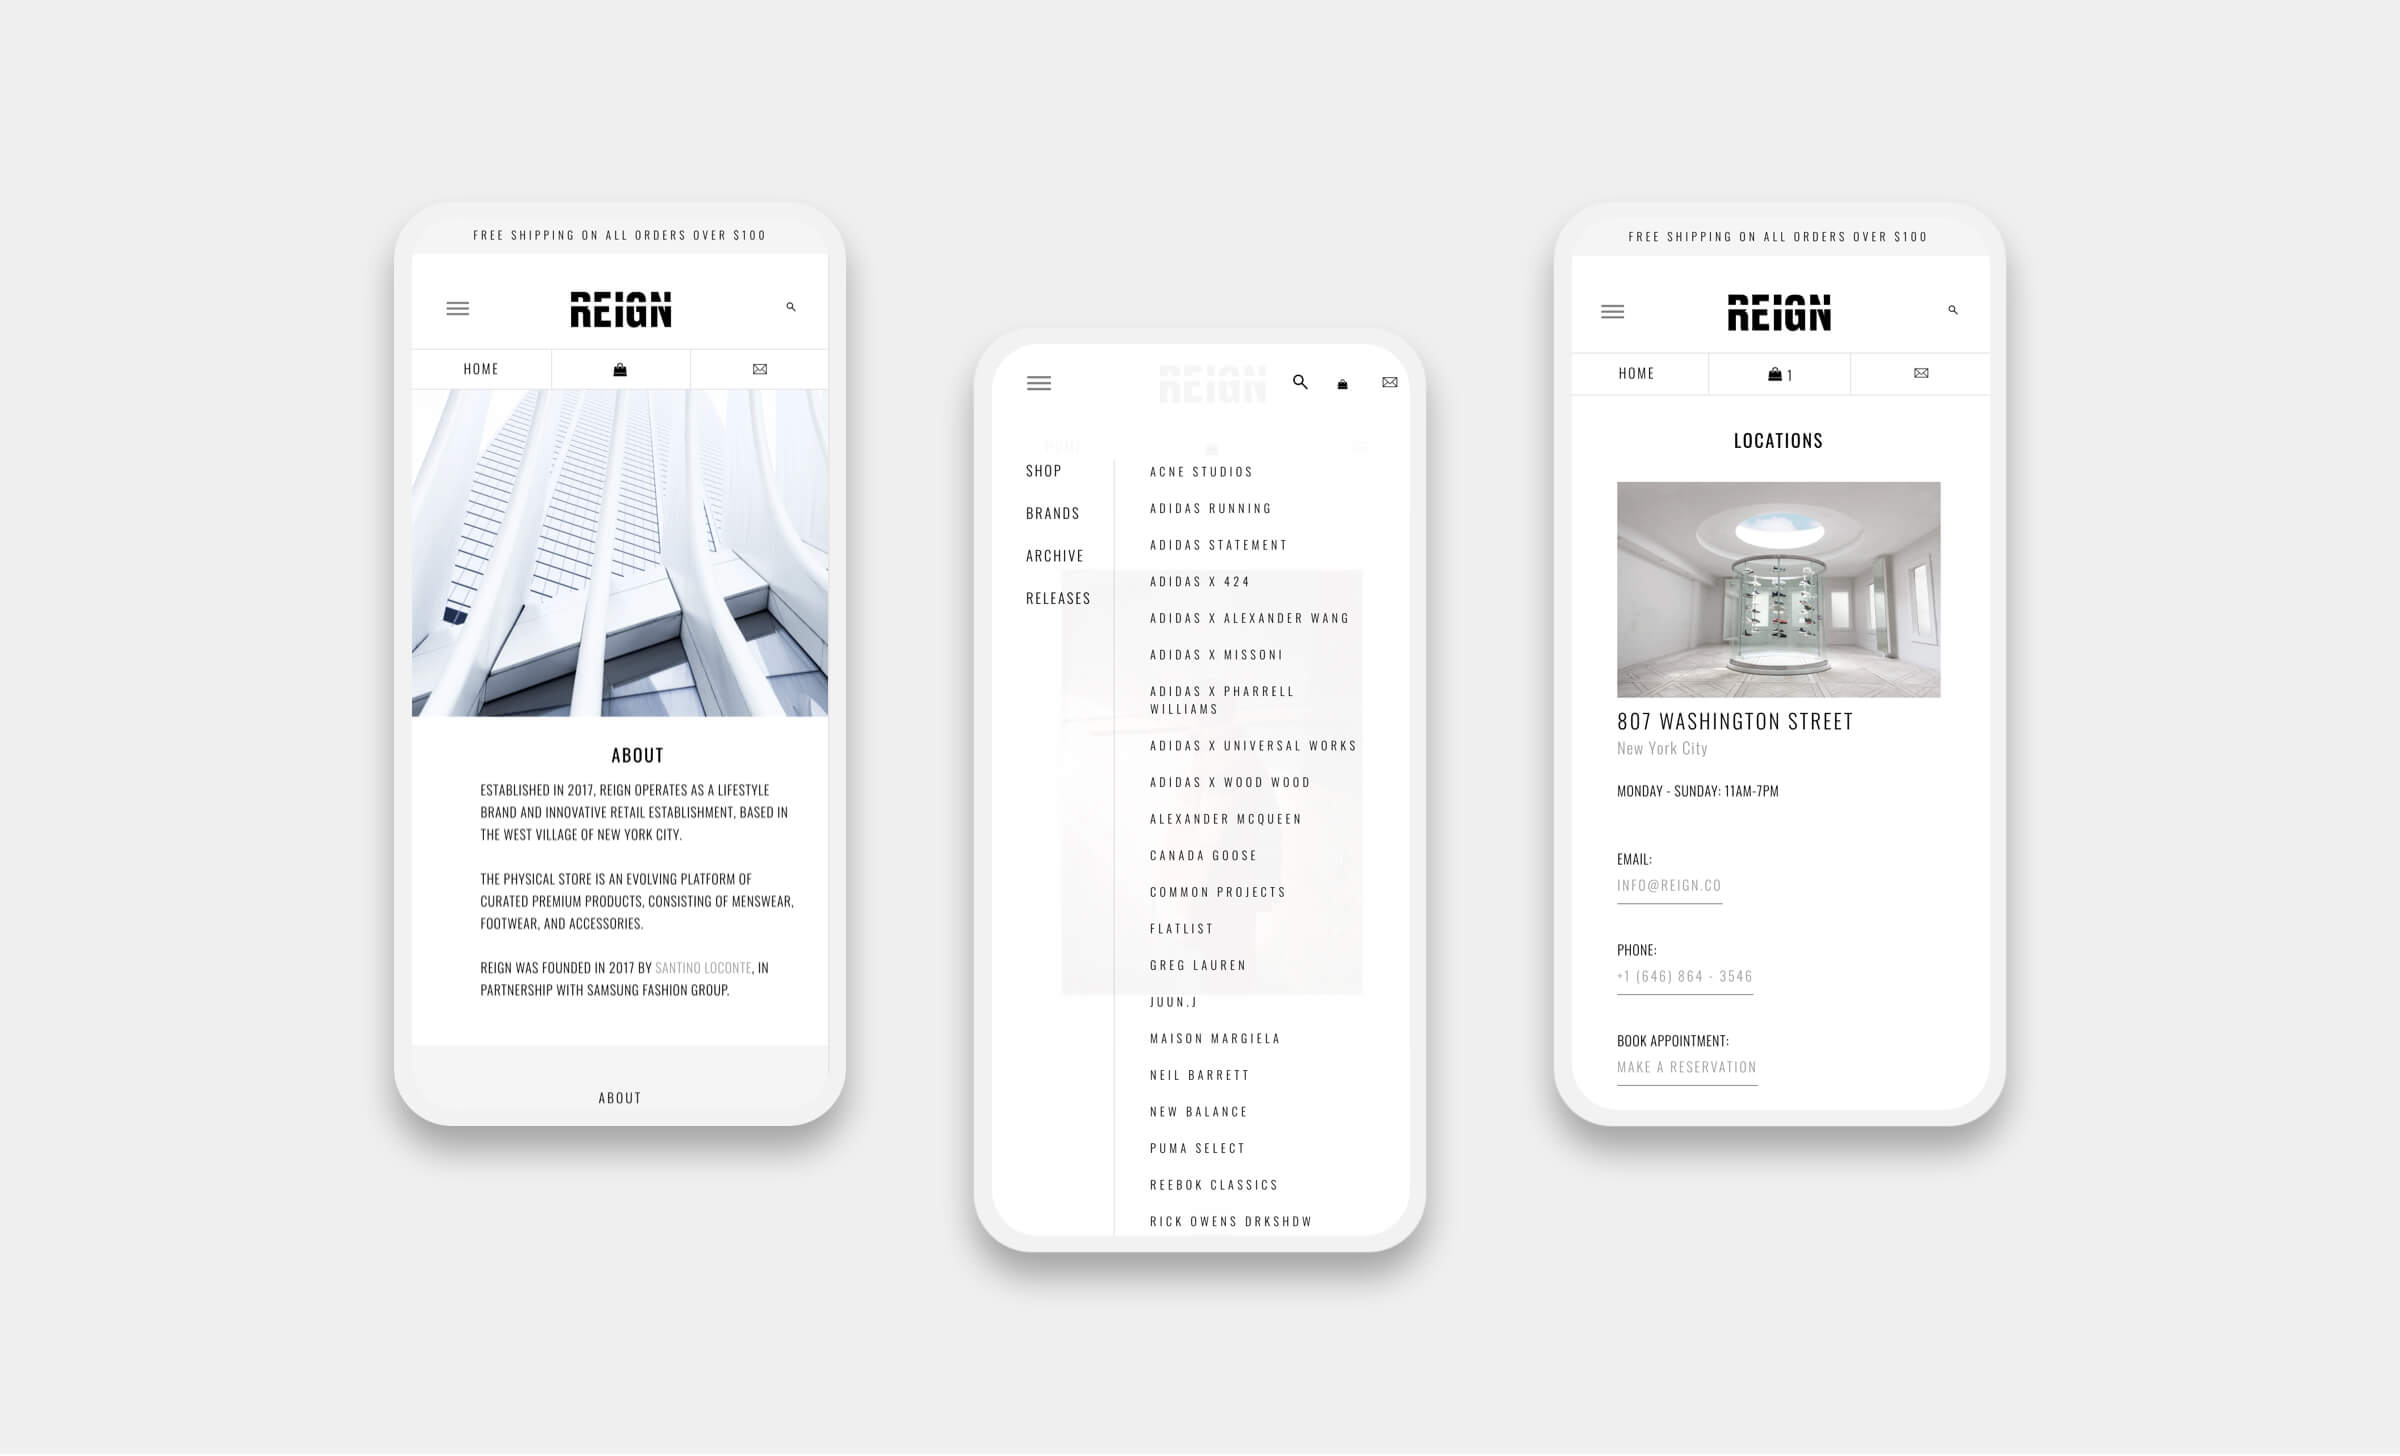 reign website responsive pages on three smartphones